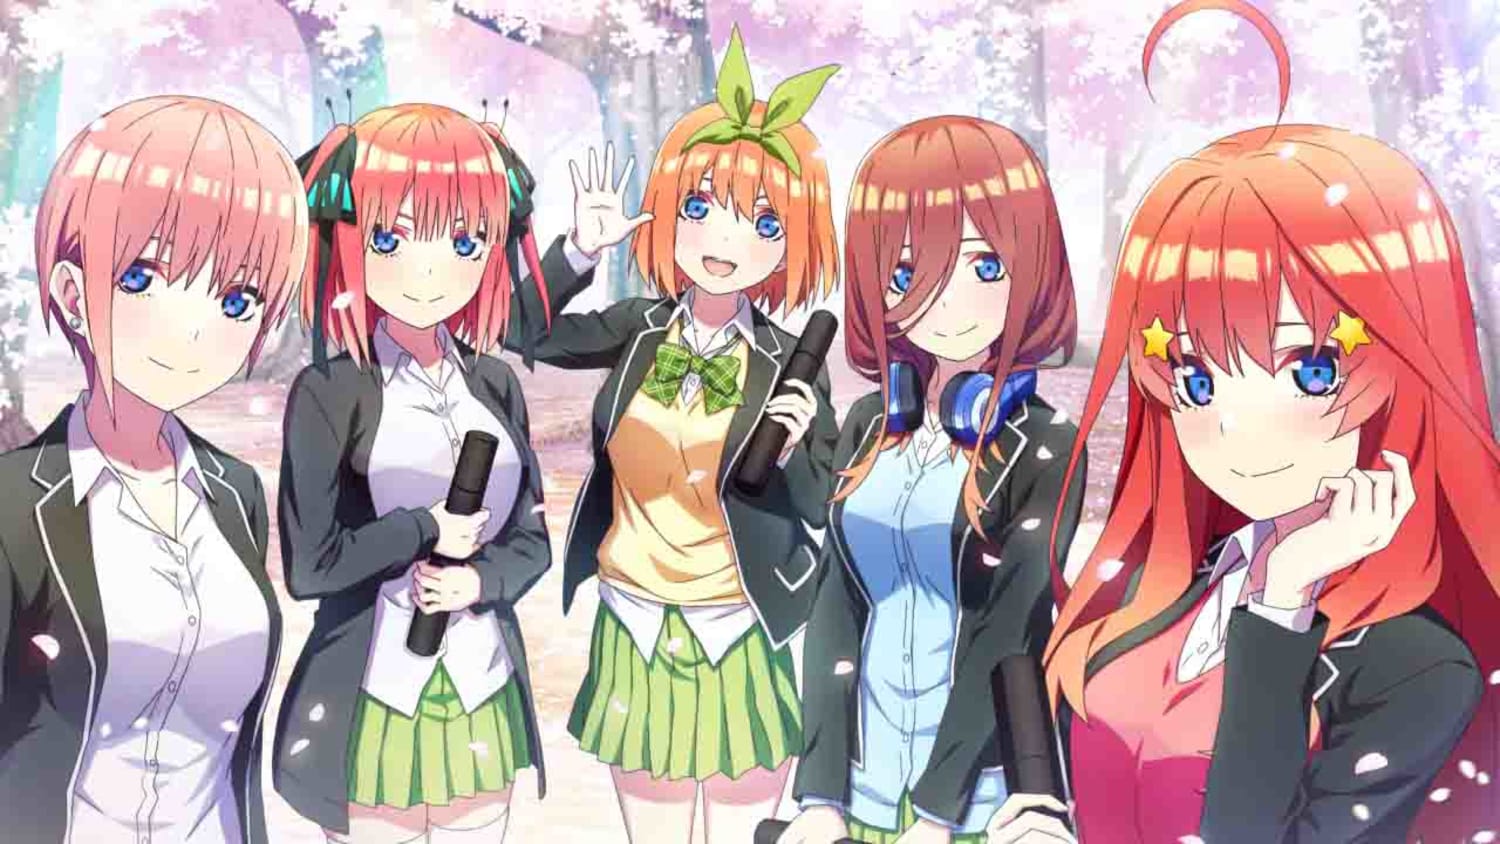 The Quintessential Quintuplets - Five Memories Spent With You 2